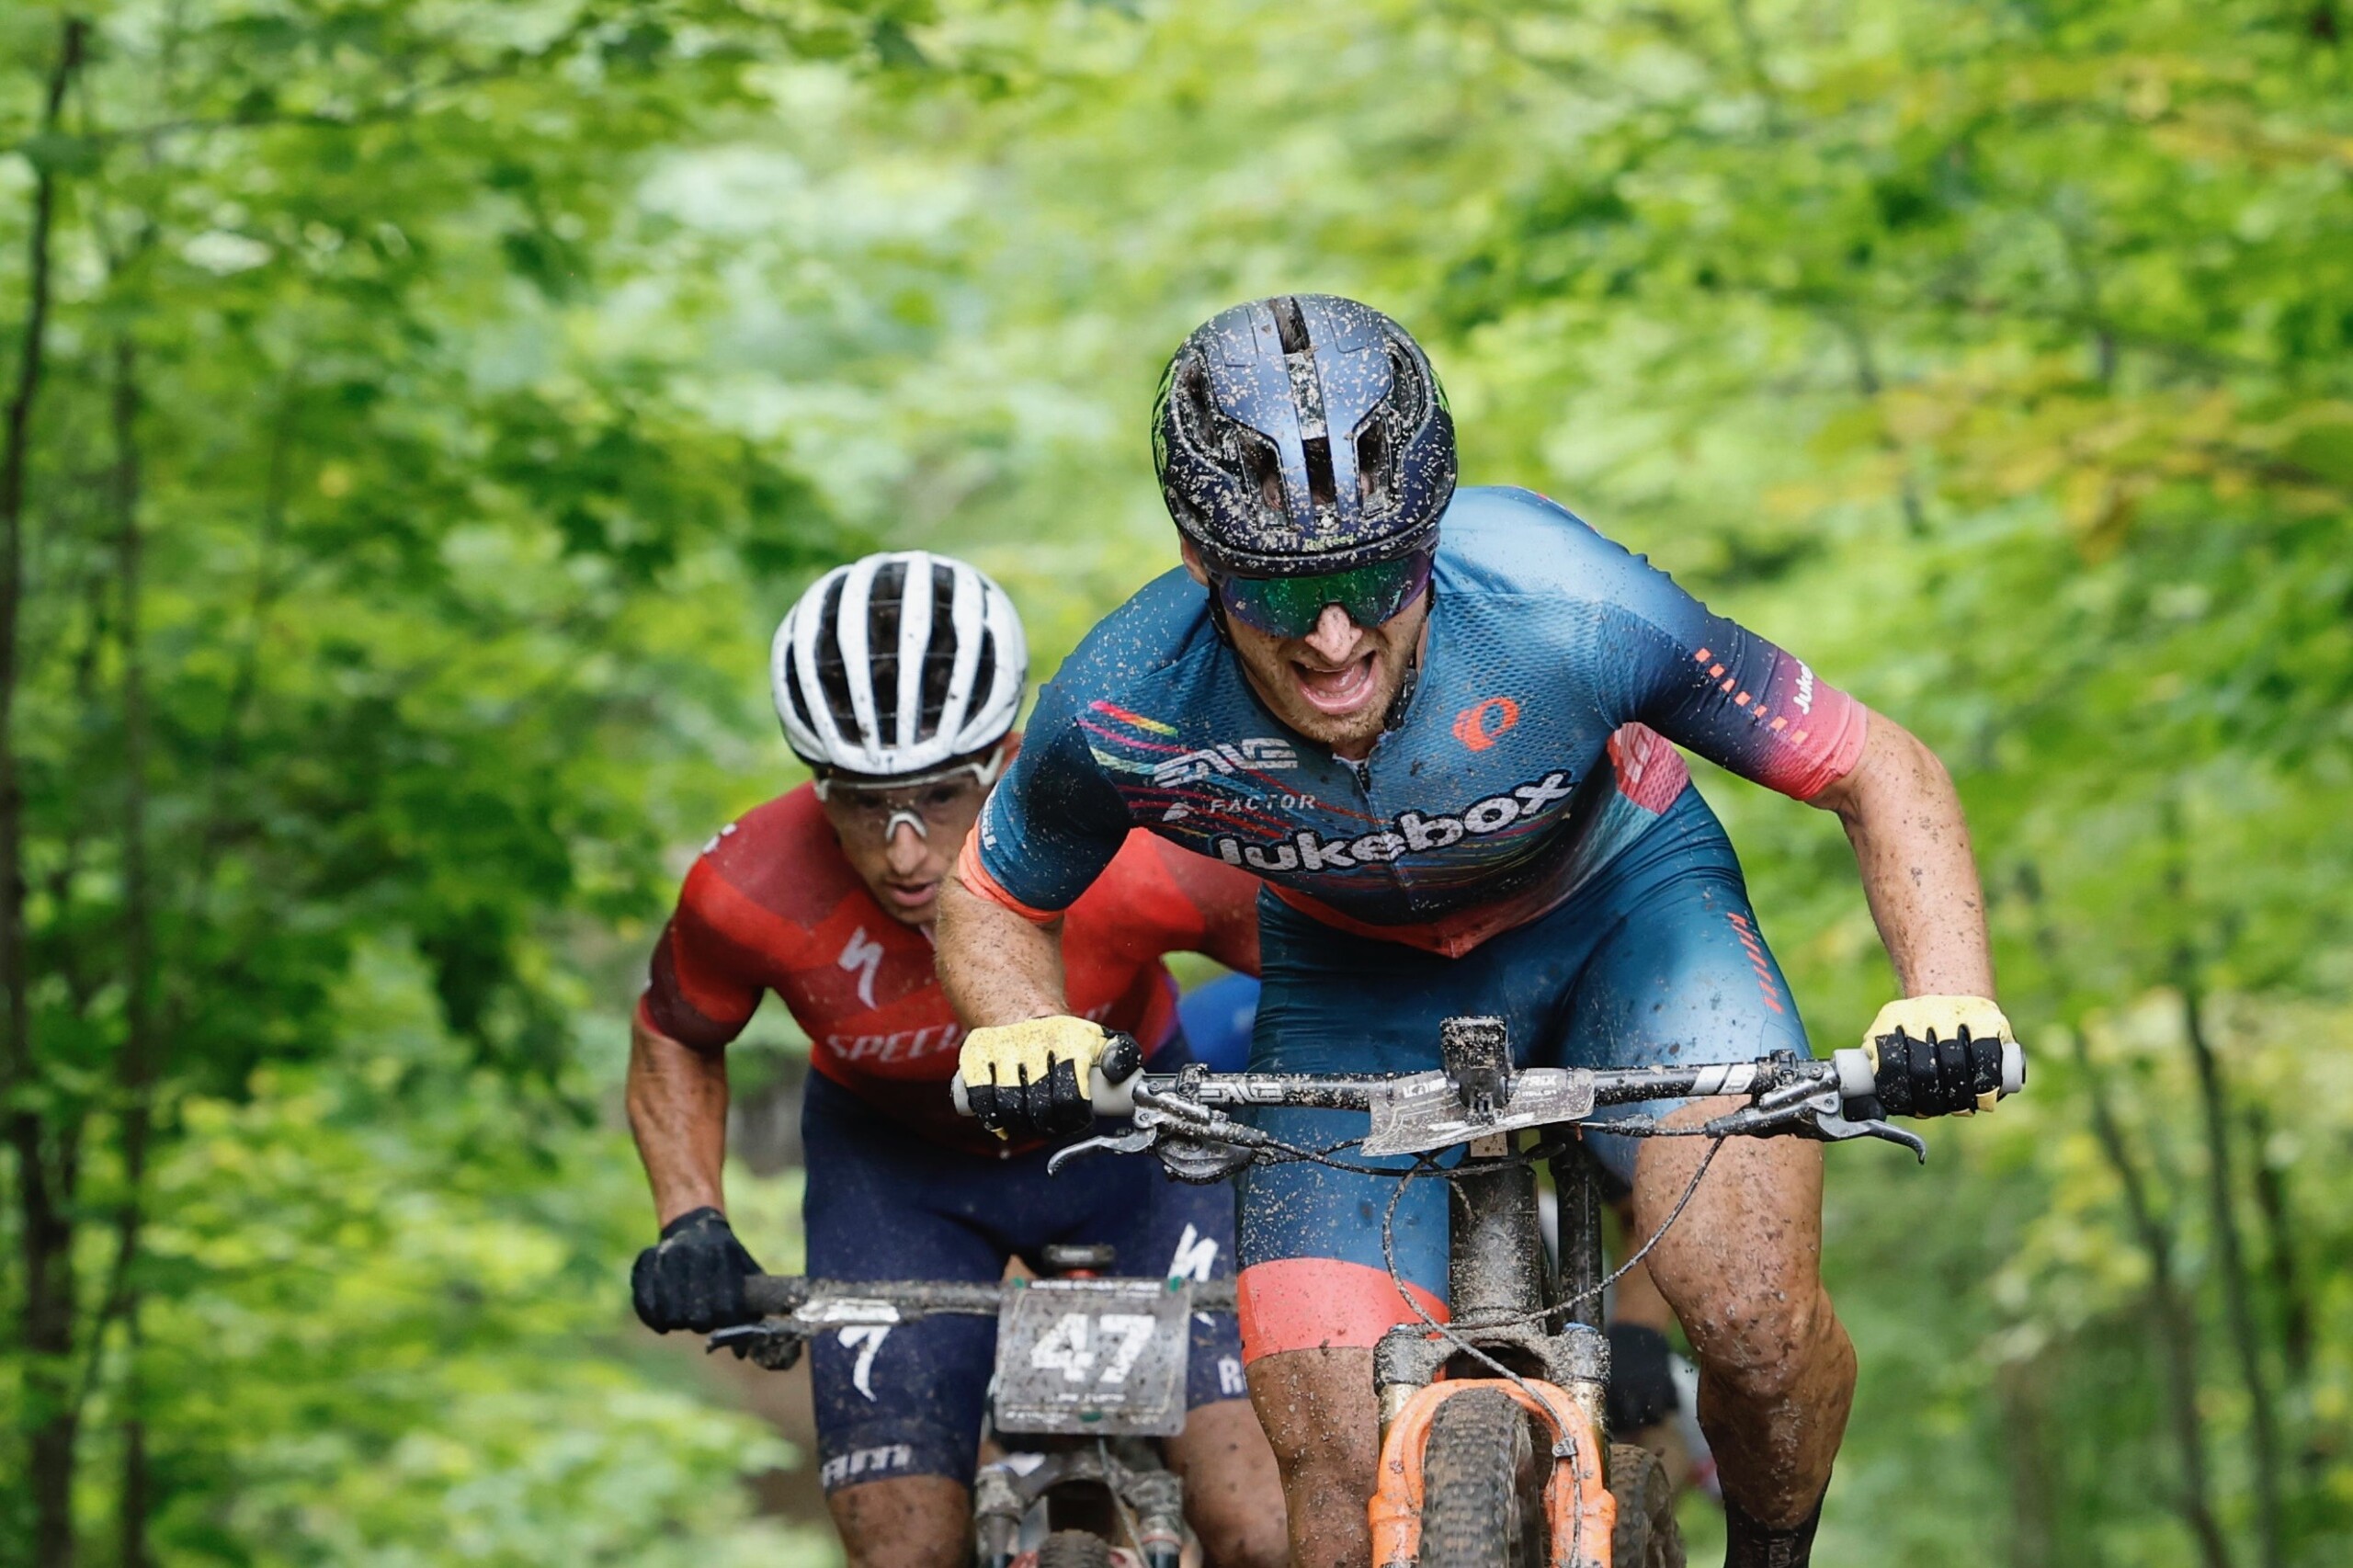 Ruth Edwards and Alexey Vermeulen Take Wins at 40th Annual Chequamegon MTB Festival